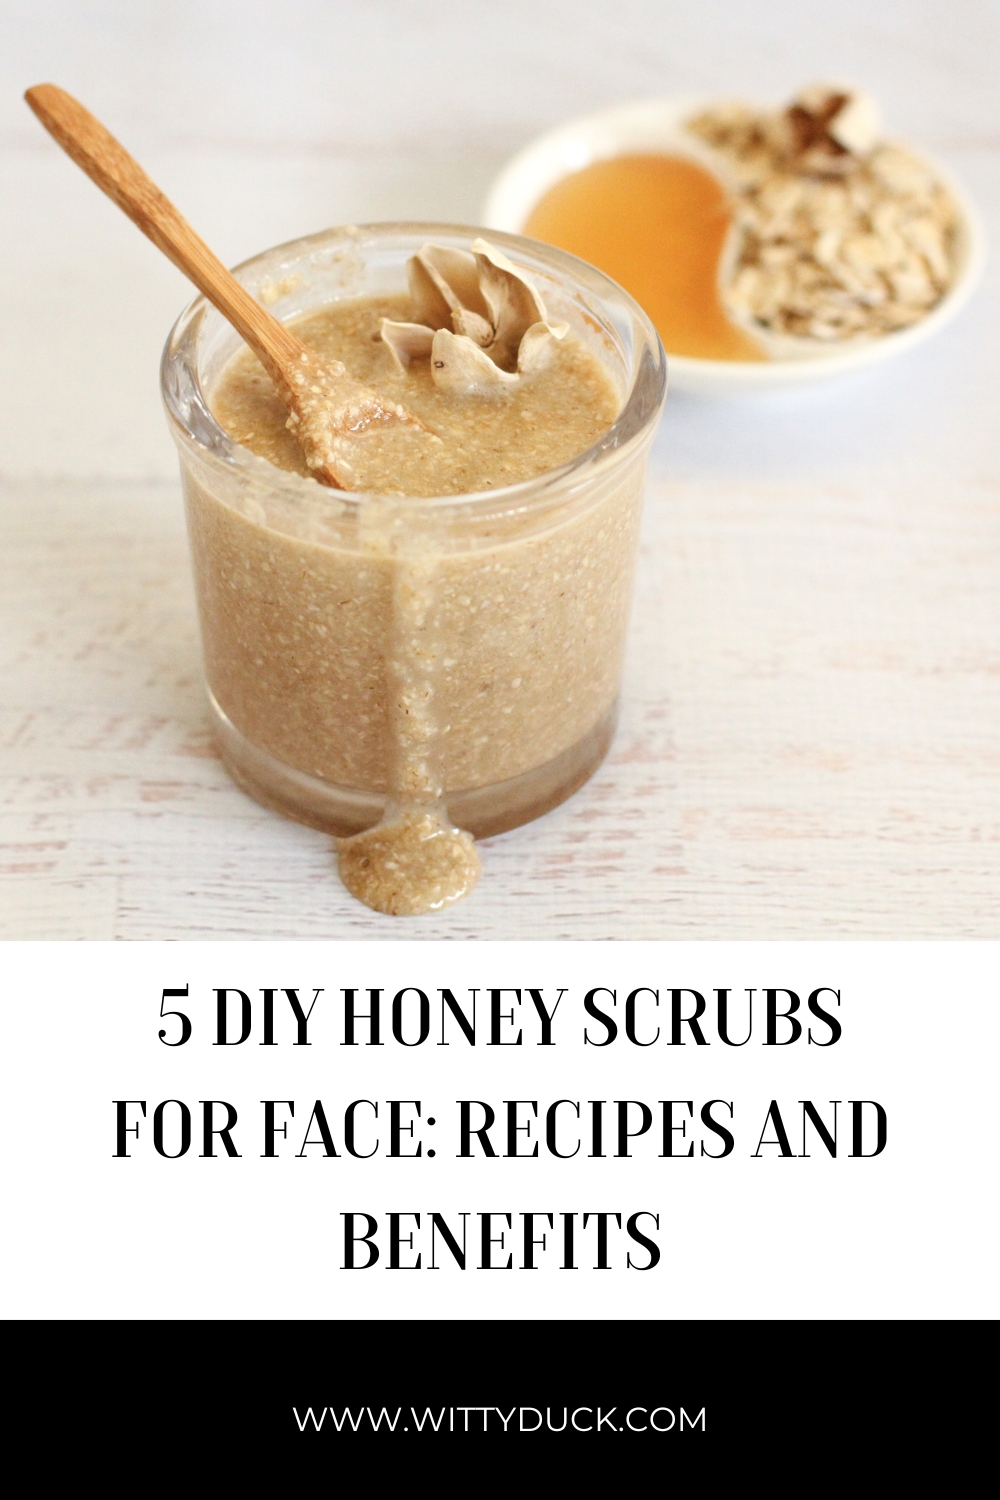 5 DIY Honey Scrubs for Face: Recipes and Benefits